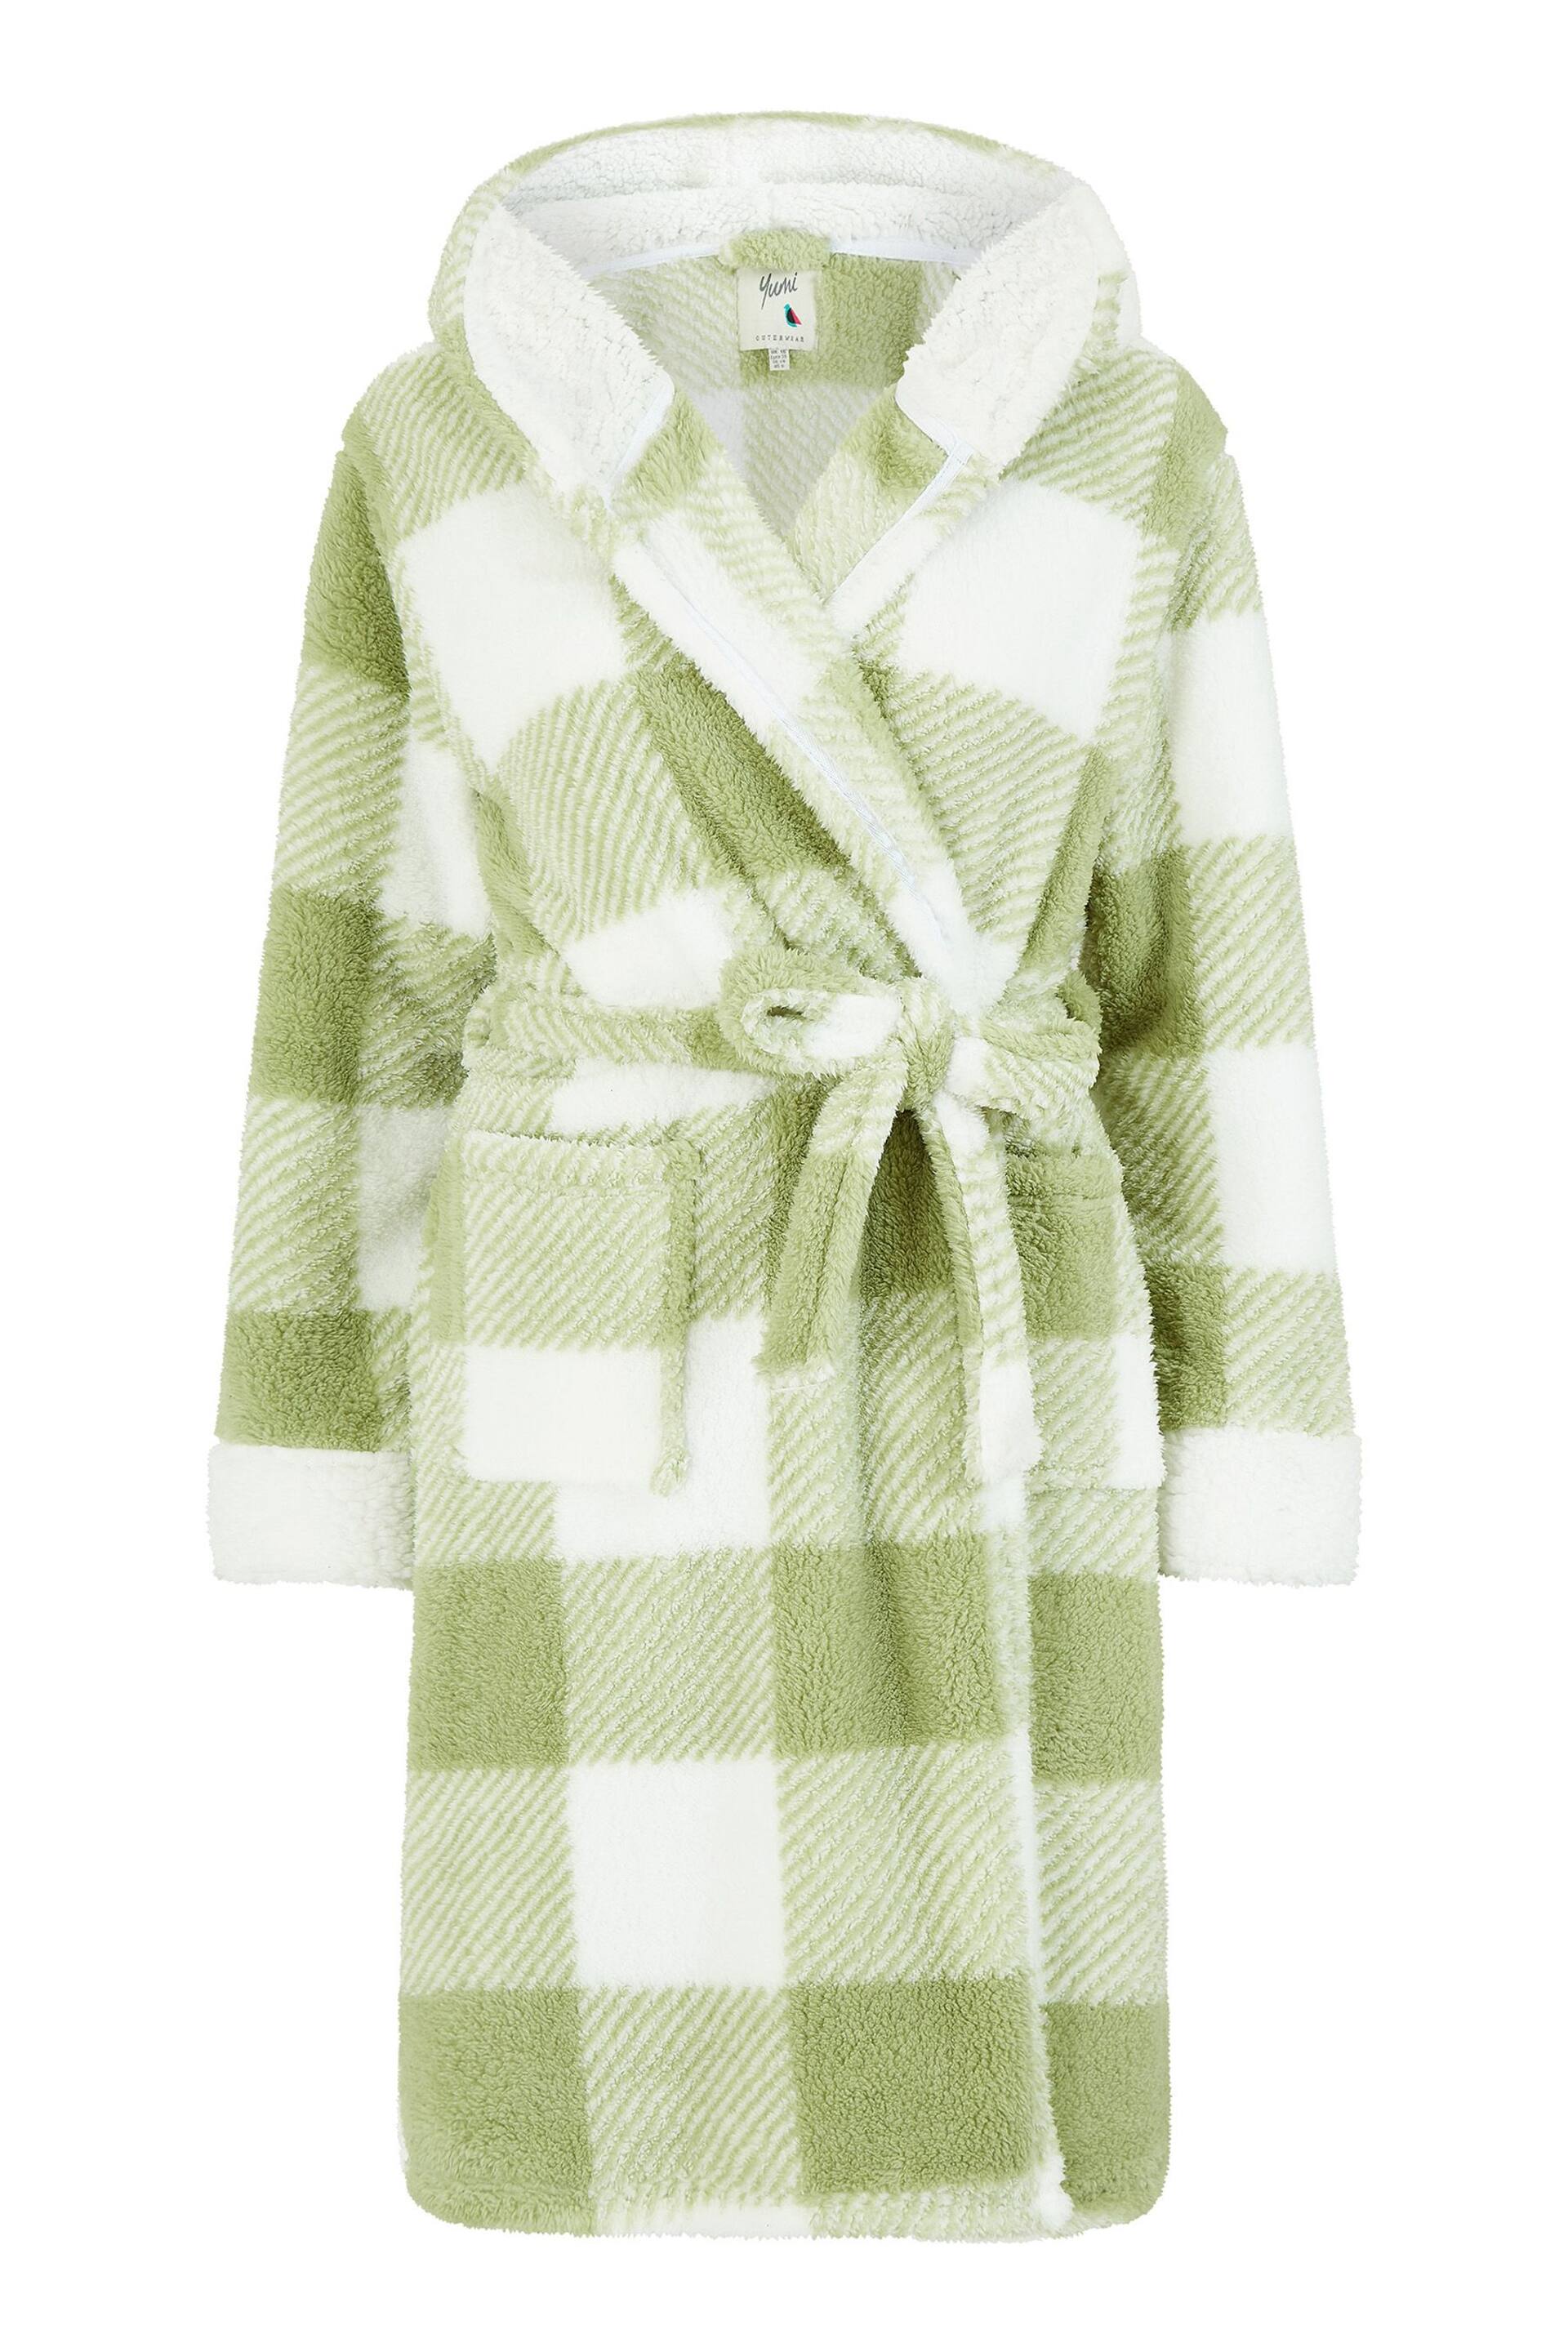 Yumi Green Check Super Soft Dressing Gown - Image 5 of 5